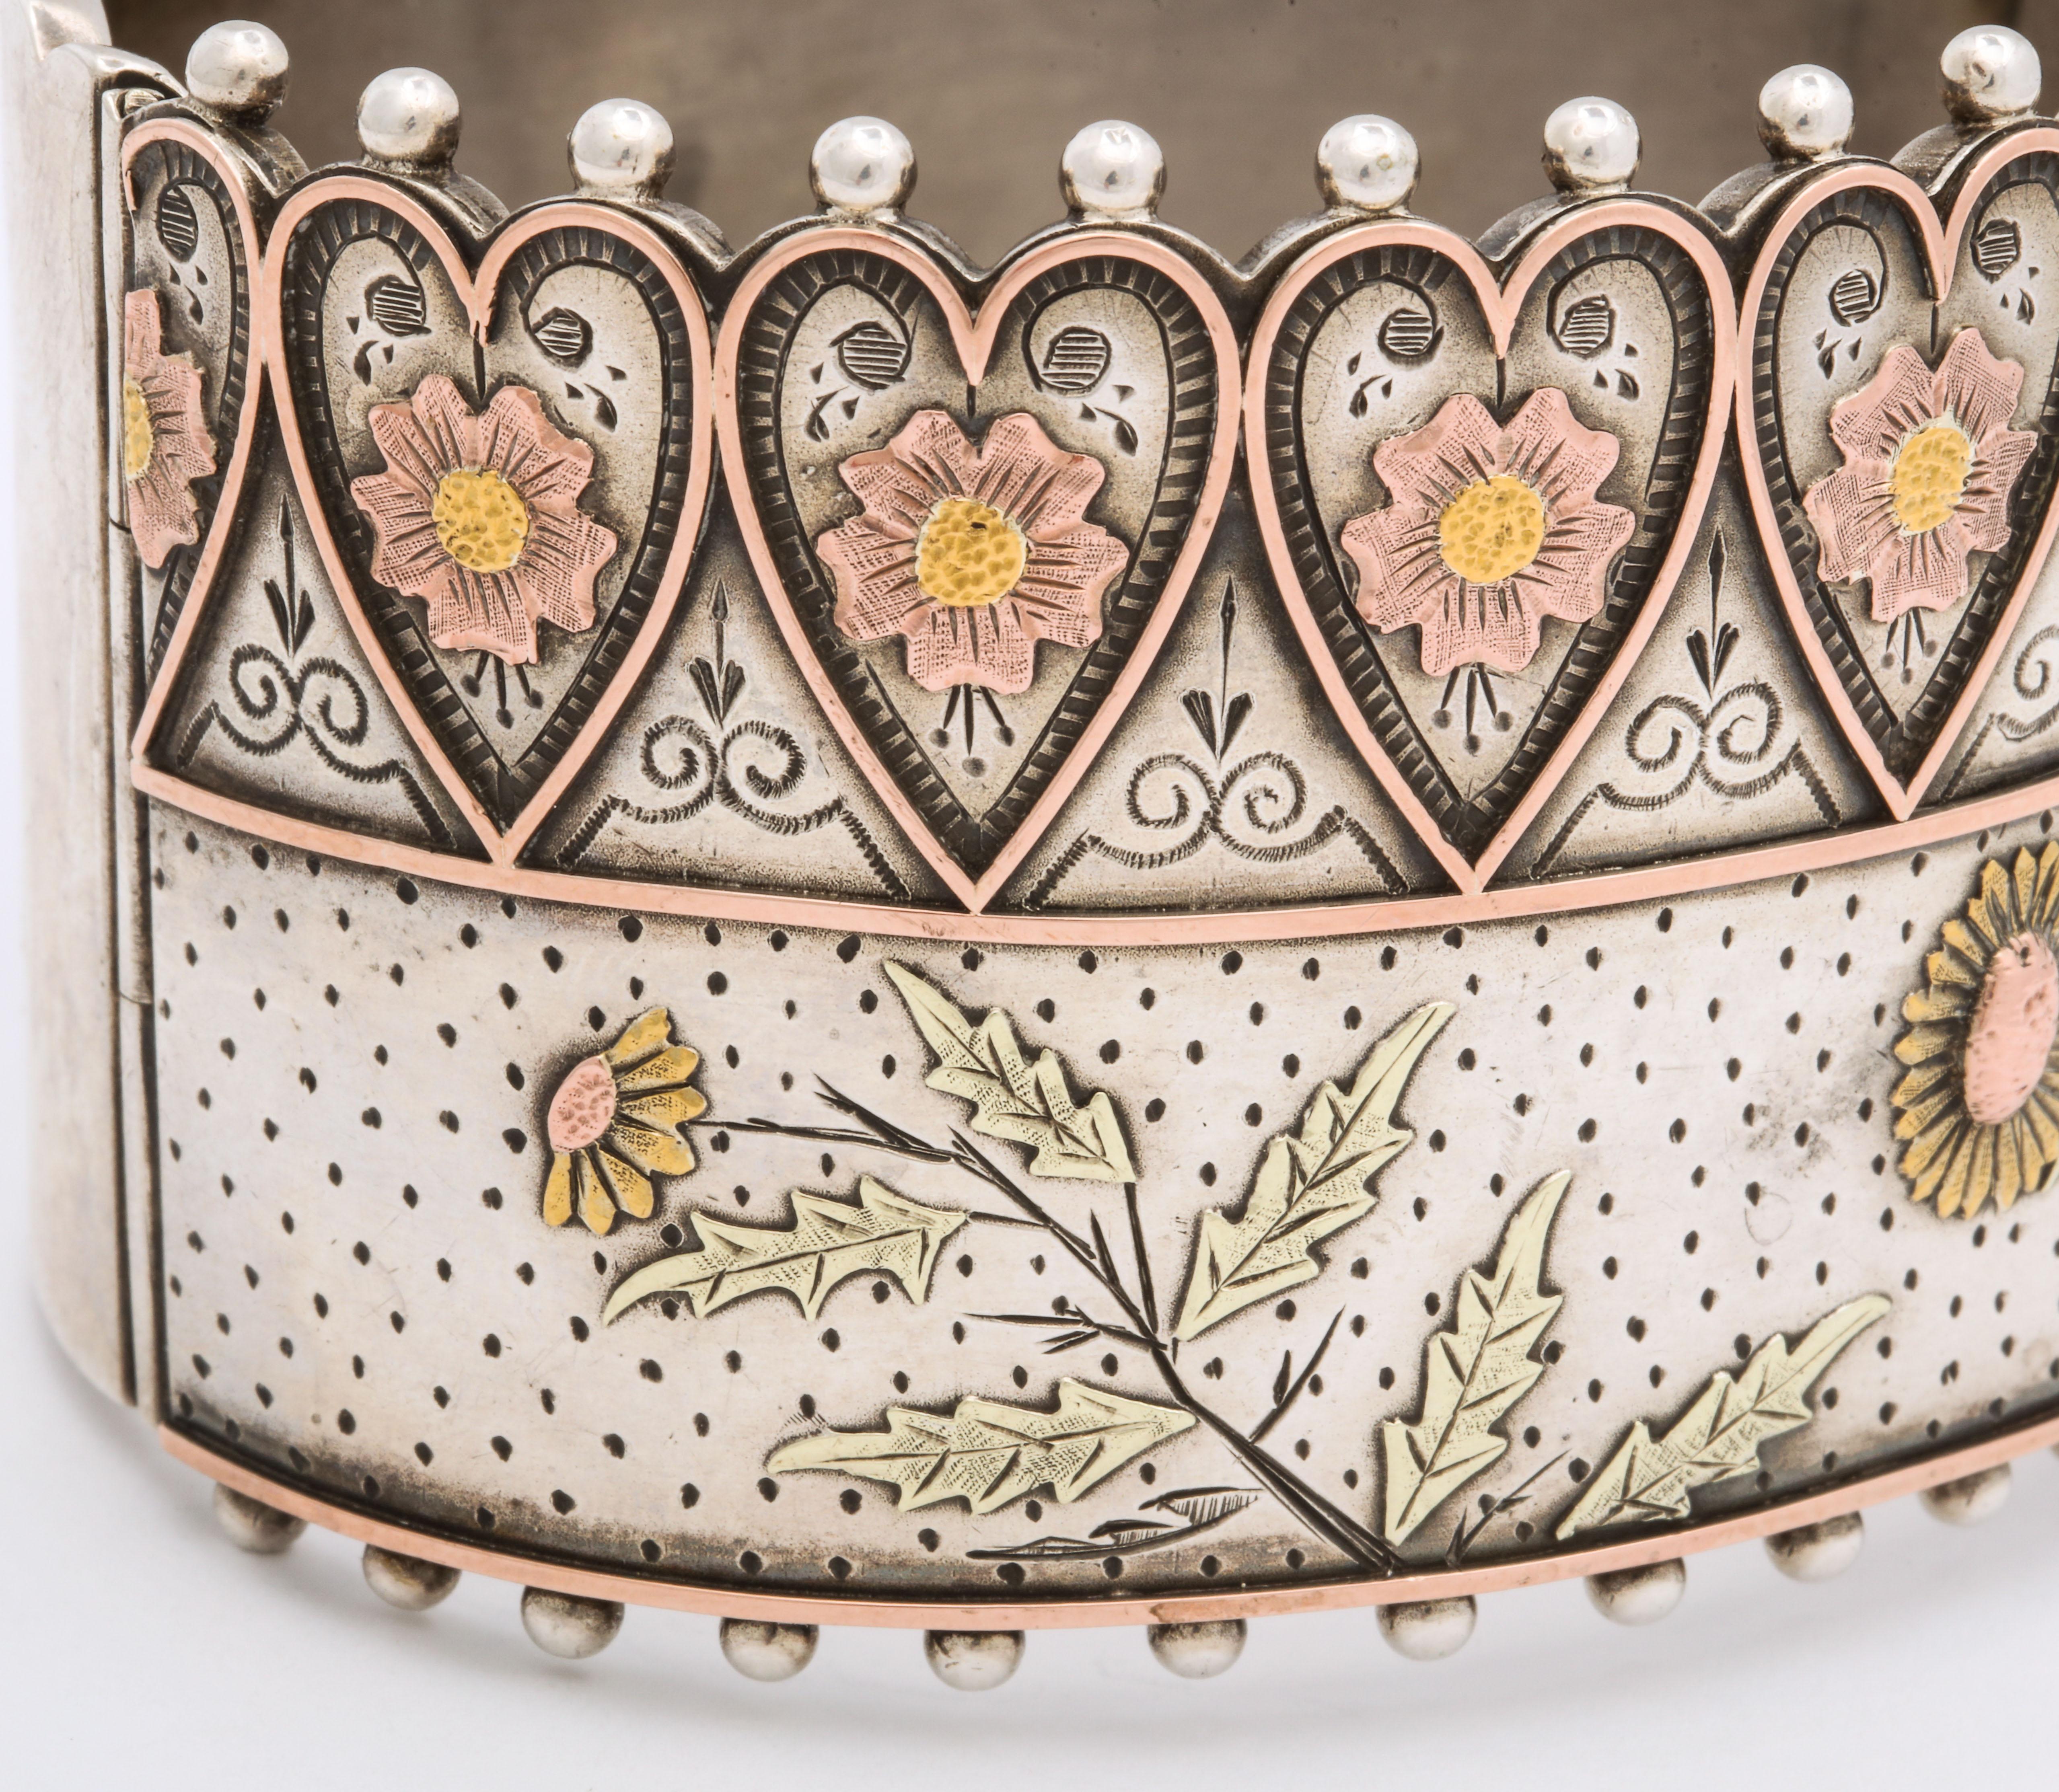 A rare design English Cuff Bracelet reaches the heights with hearts, daisies, gold, sterling and fine condition. The entire front is engraved with daisies inside the hearts and below the gold central dividing line. The symbolism of the Victorian era